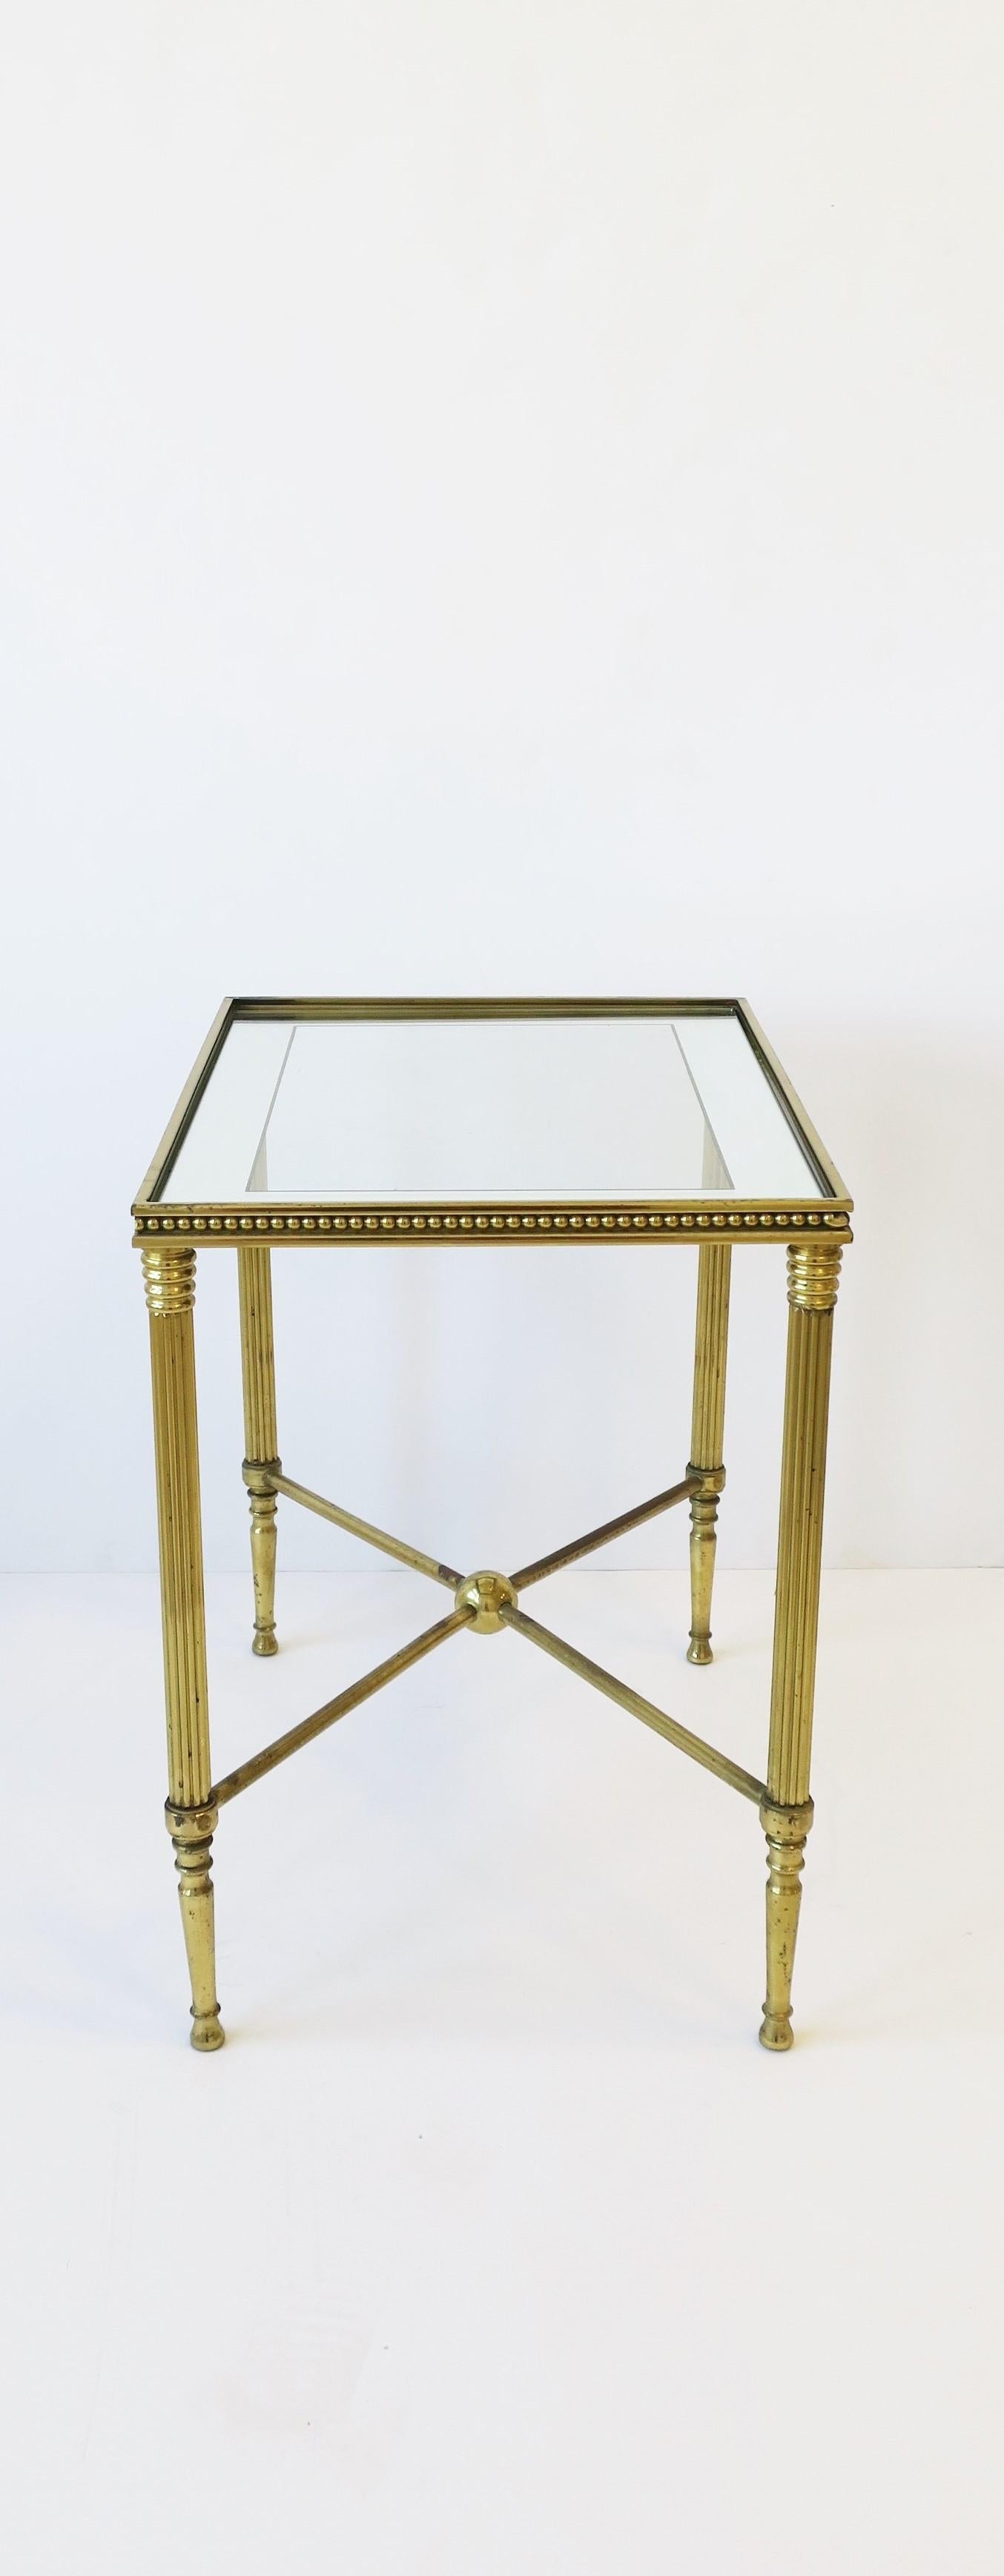 A beautiful mid-20th century Italian brass and glass rectangular end or side table in the Directoire style after maker Maison Jansen, circa 1960s, Italy. Glass top with mirrored edge is 'inset' into brass frame which has beautiful bead detailing